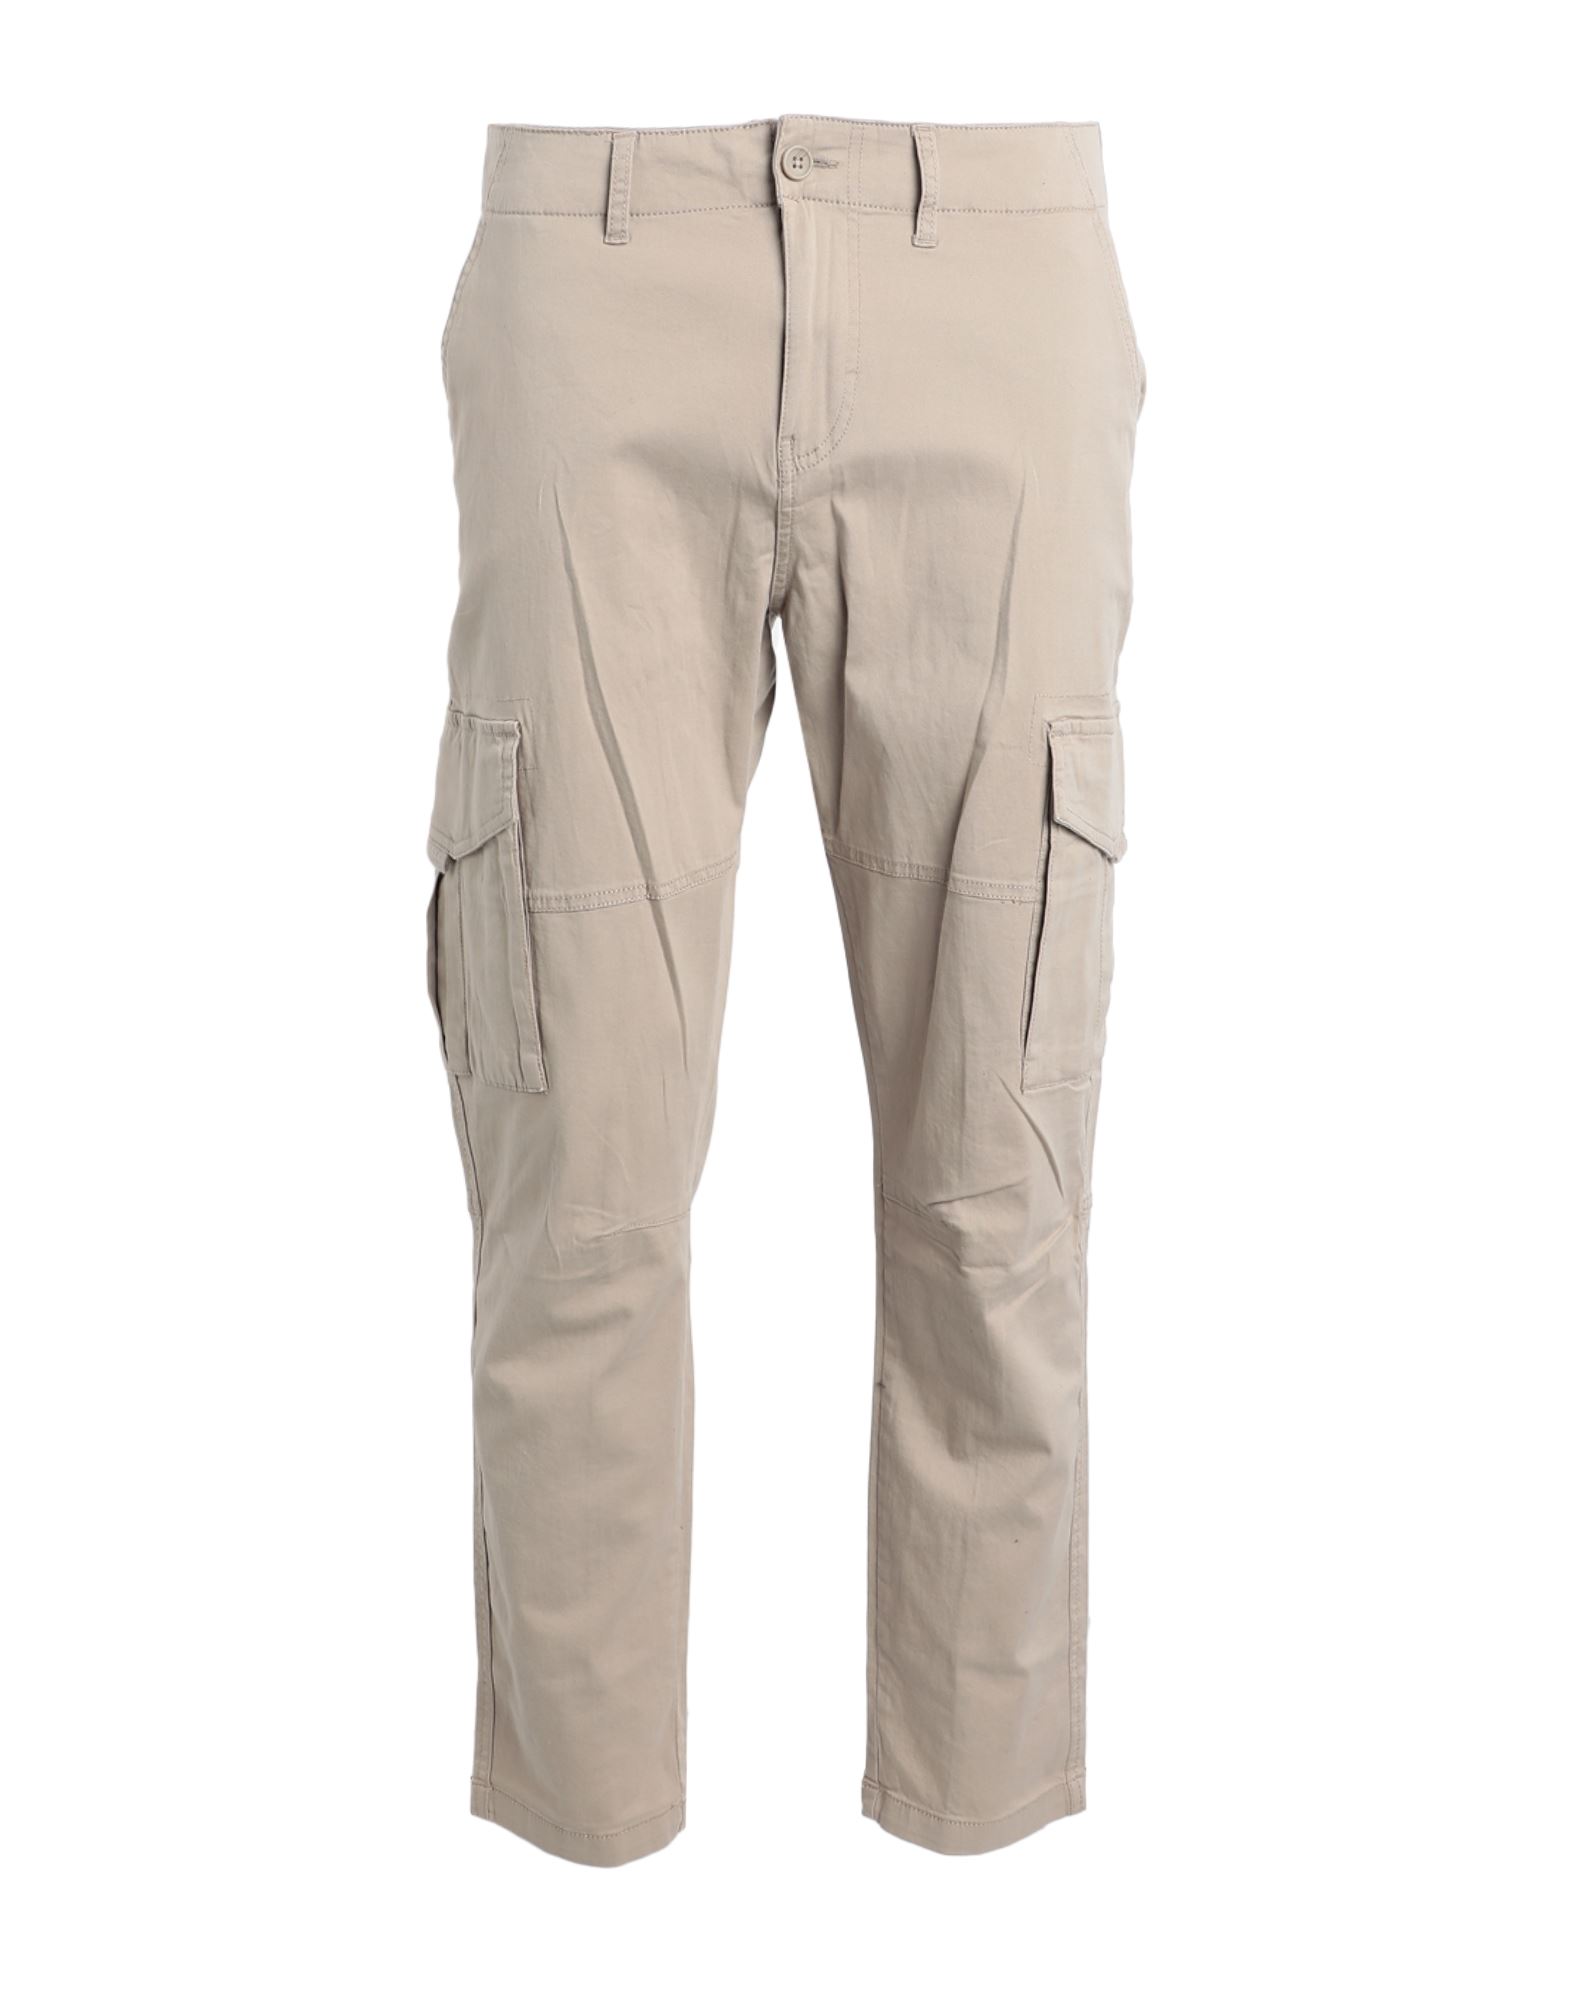 Only & Sons Man Pants Beige Size 32w-32l Cotton, Recycled Cotton, Elastane